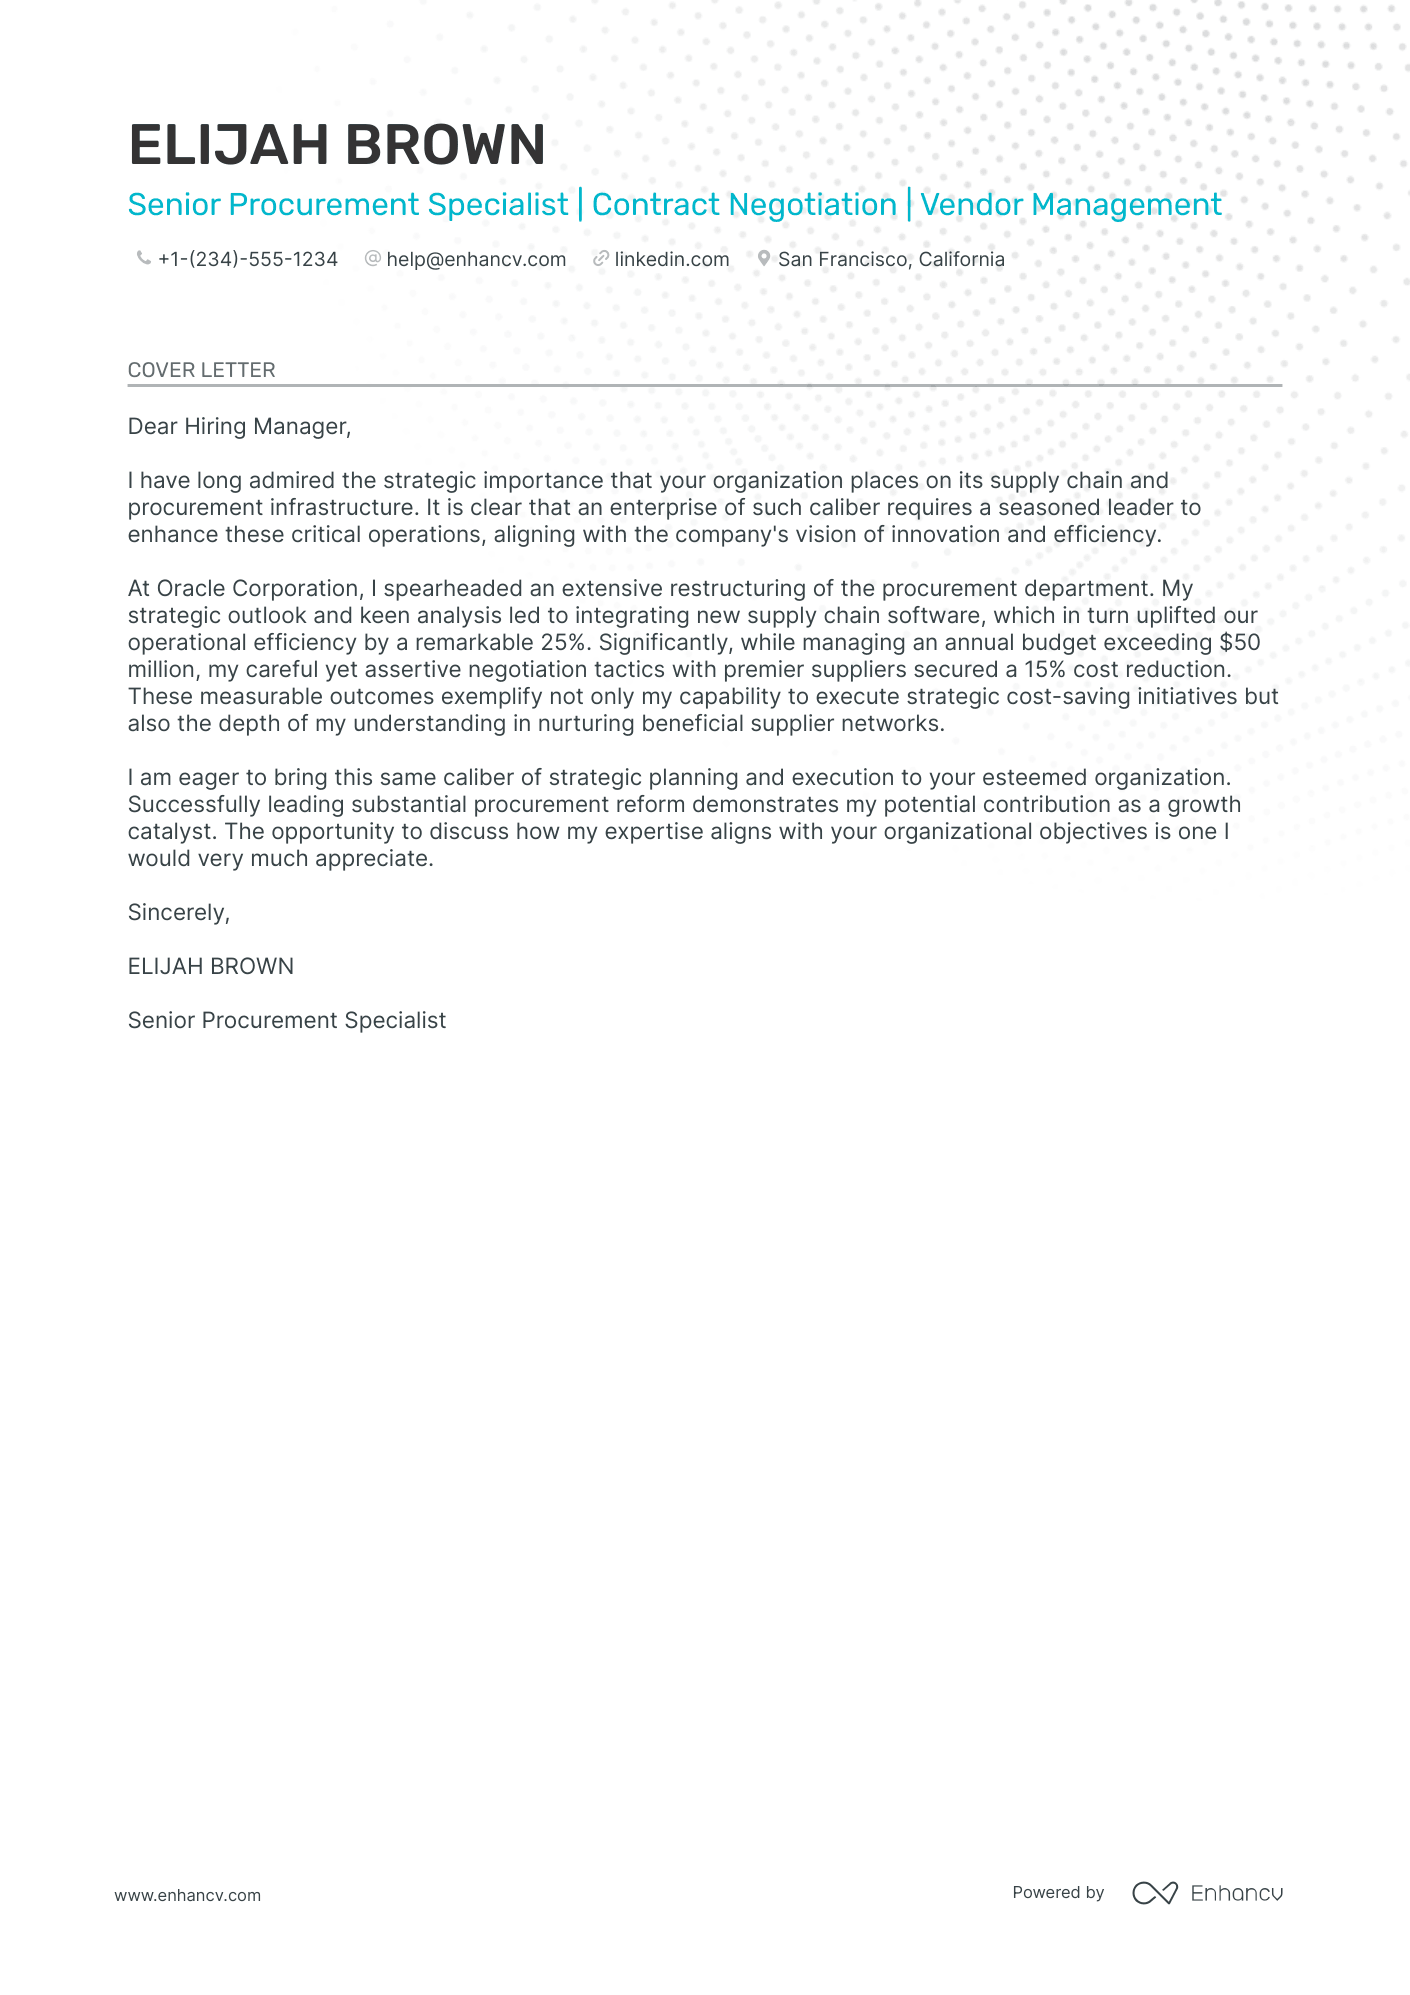 Purchasing Director cover letter